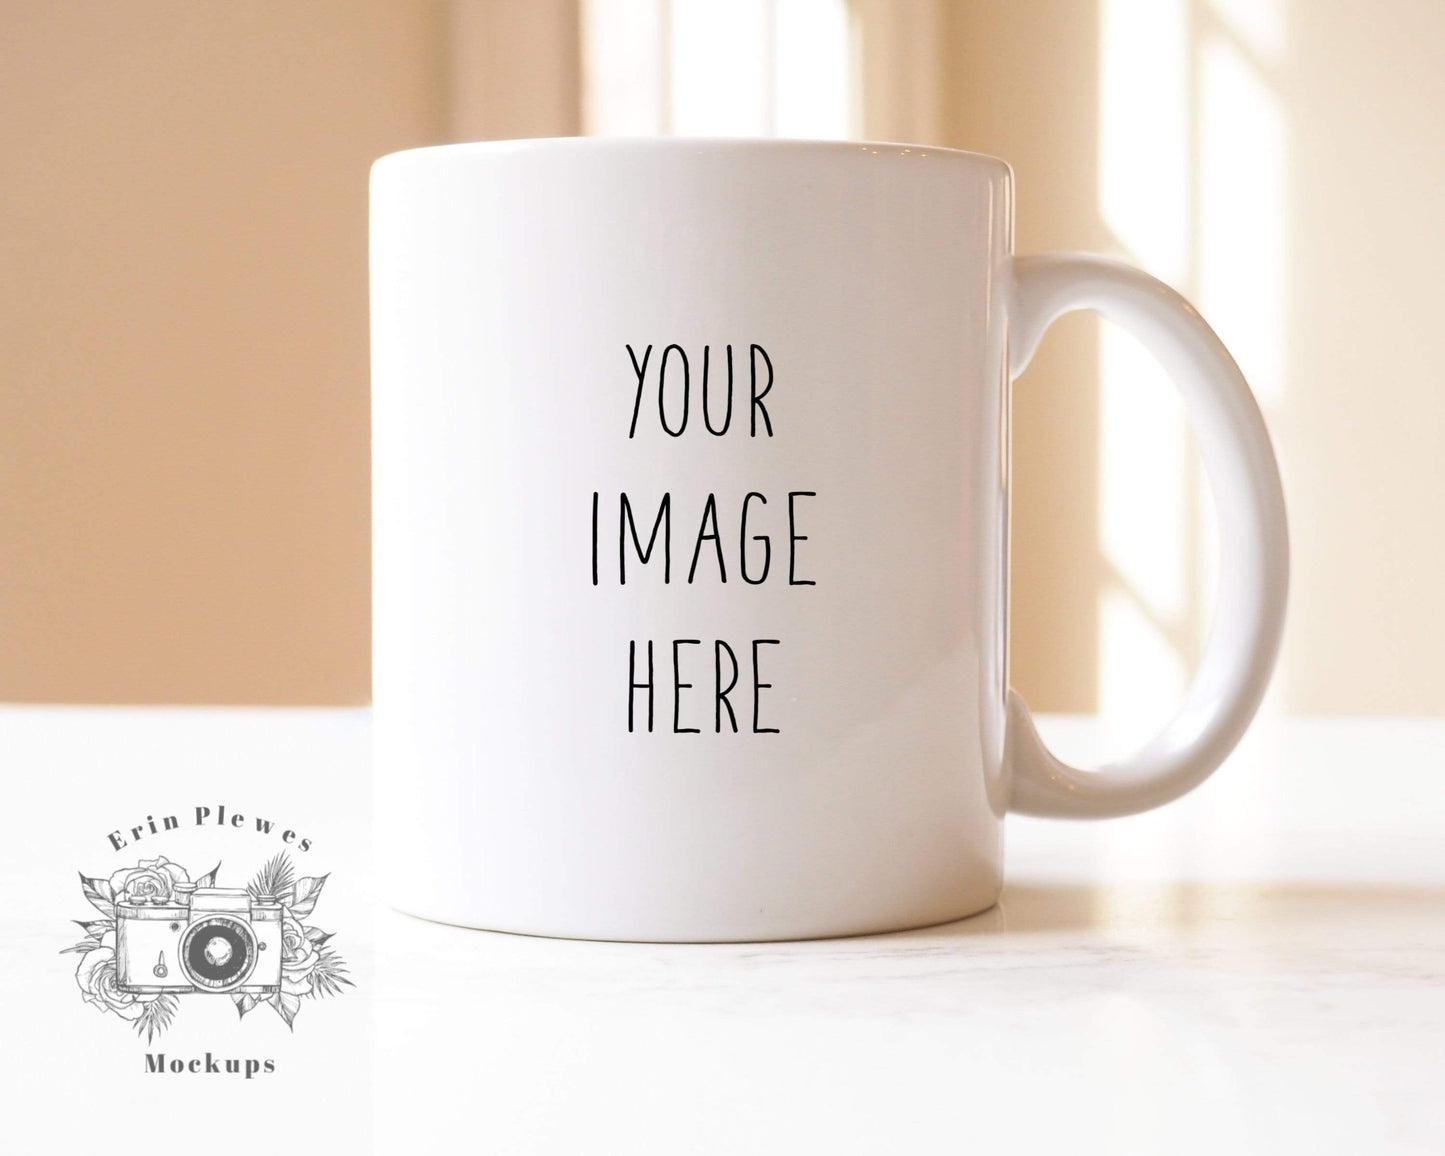 Erin Plewes Mockups White Mug Mockup, 11 oz Coffee Cup Mock Up with Clean Bright Background, Digital Download Minimalist Stock Photo Template